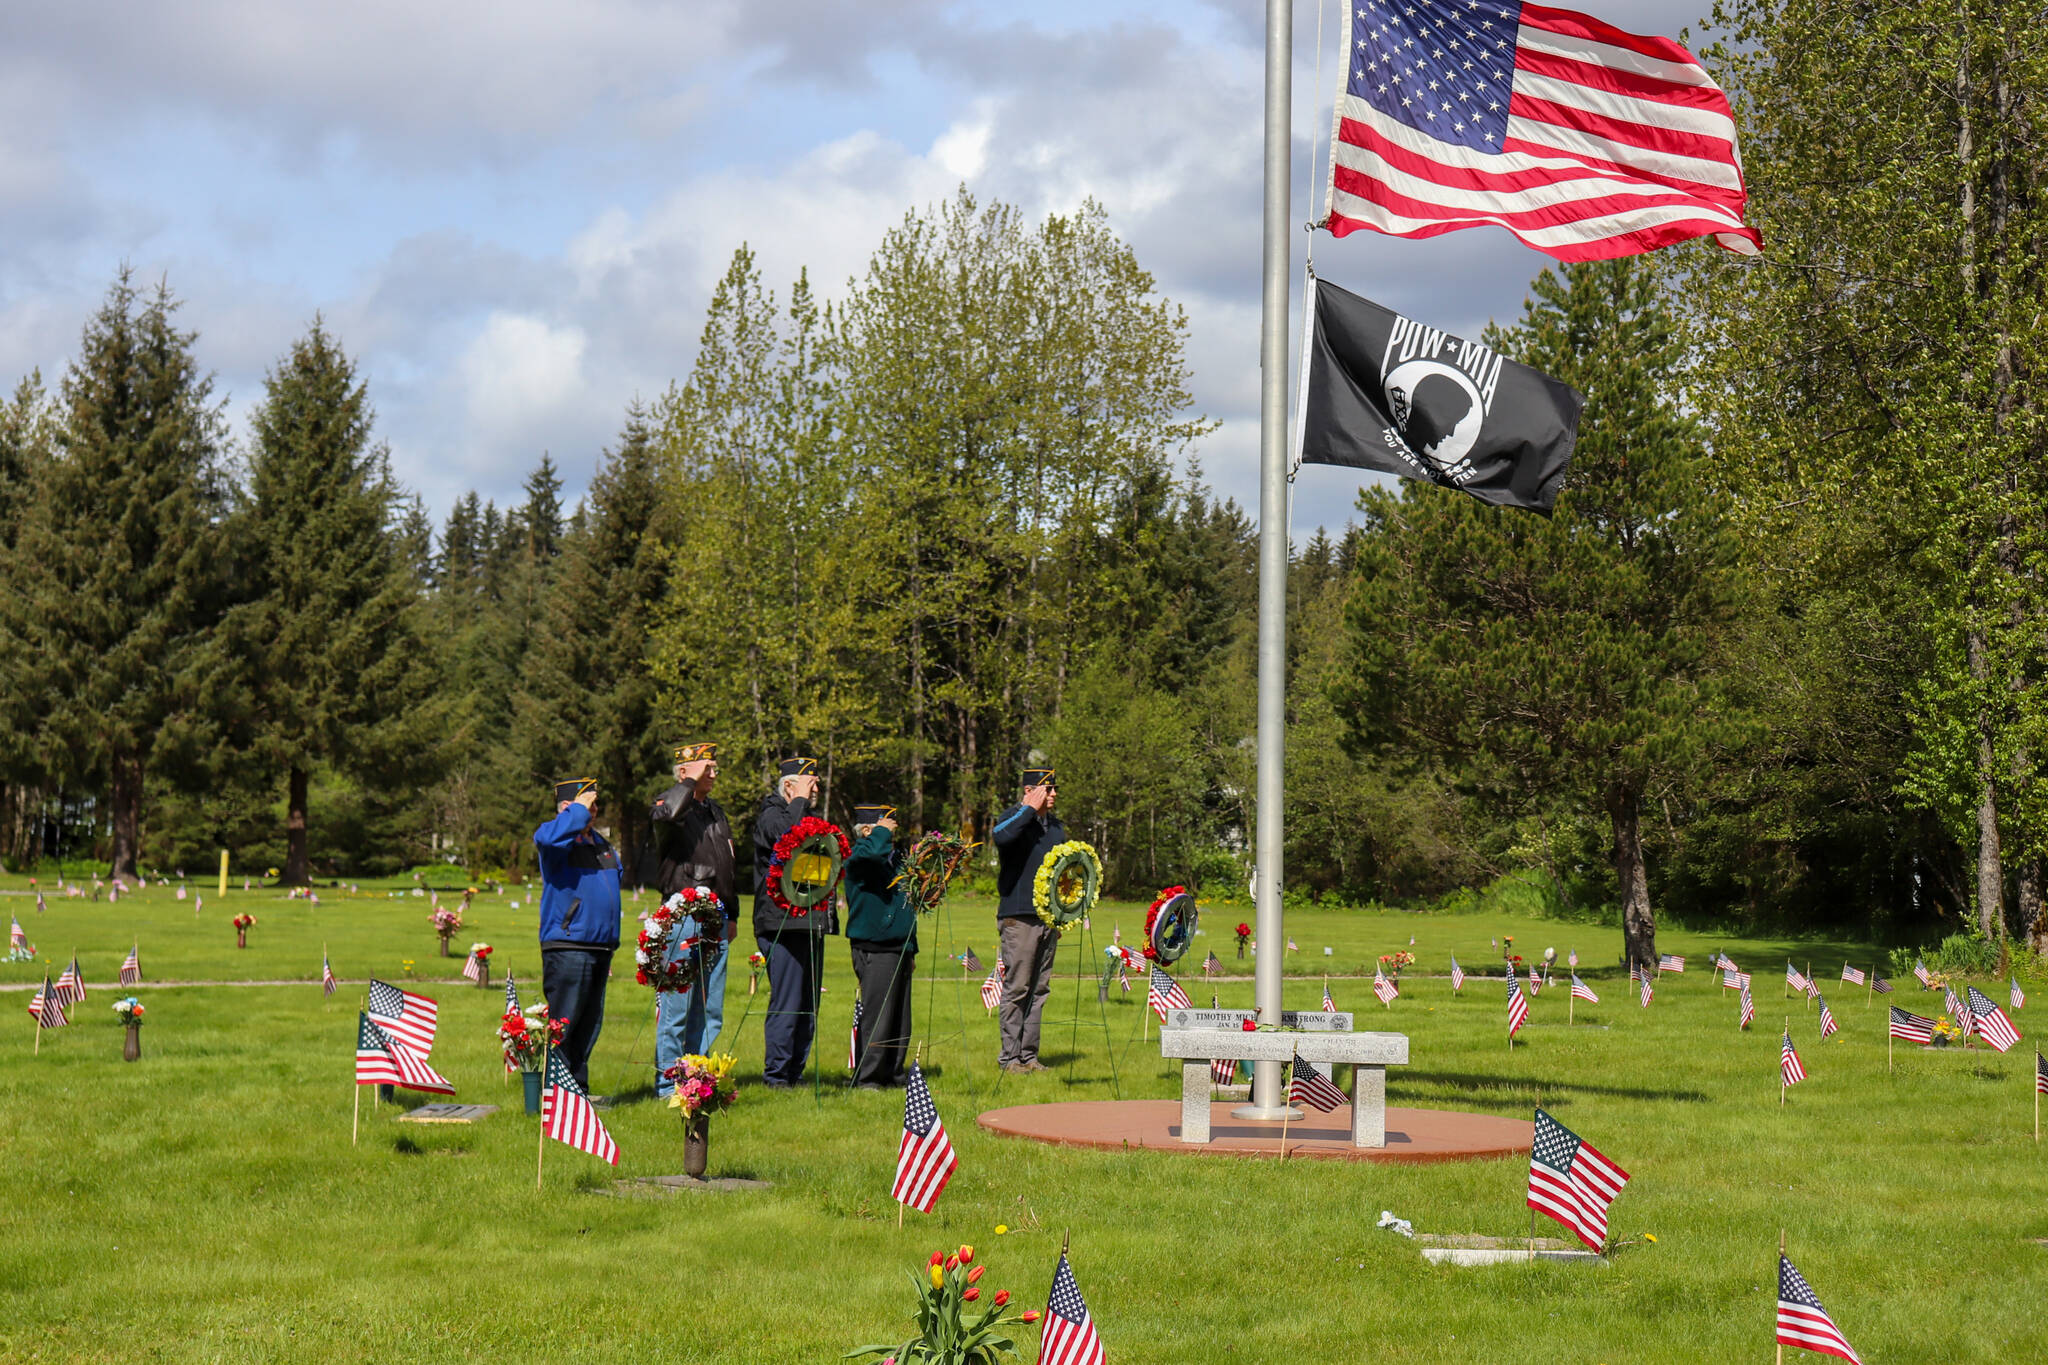 Wreath bearers present wreaths for fallen comrades, brothers and sisters in arms during a Memorial Day ceremony at Alaska Memorial Park on Monday. Laying wreaths on the graves of fallen heroes is a way to honor and remember the sacrifices made. (Jasz Garrett / Juneau Empire)